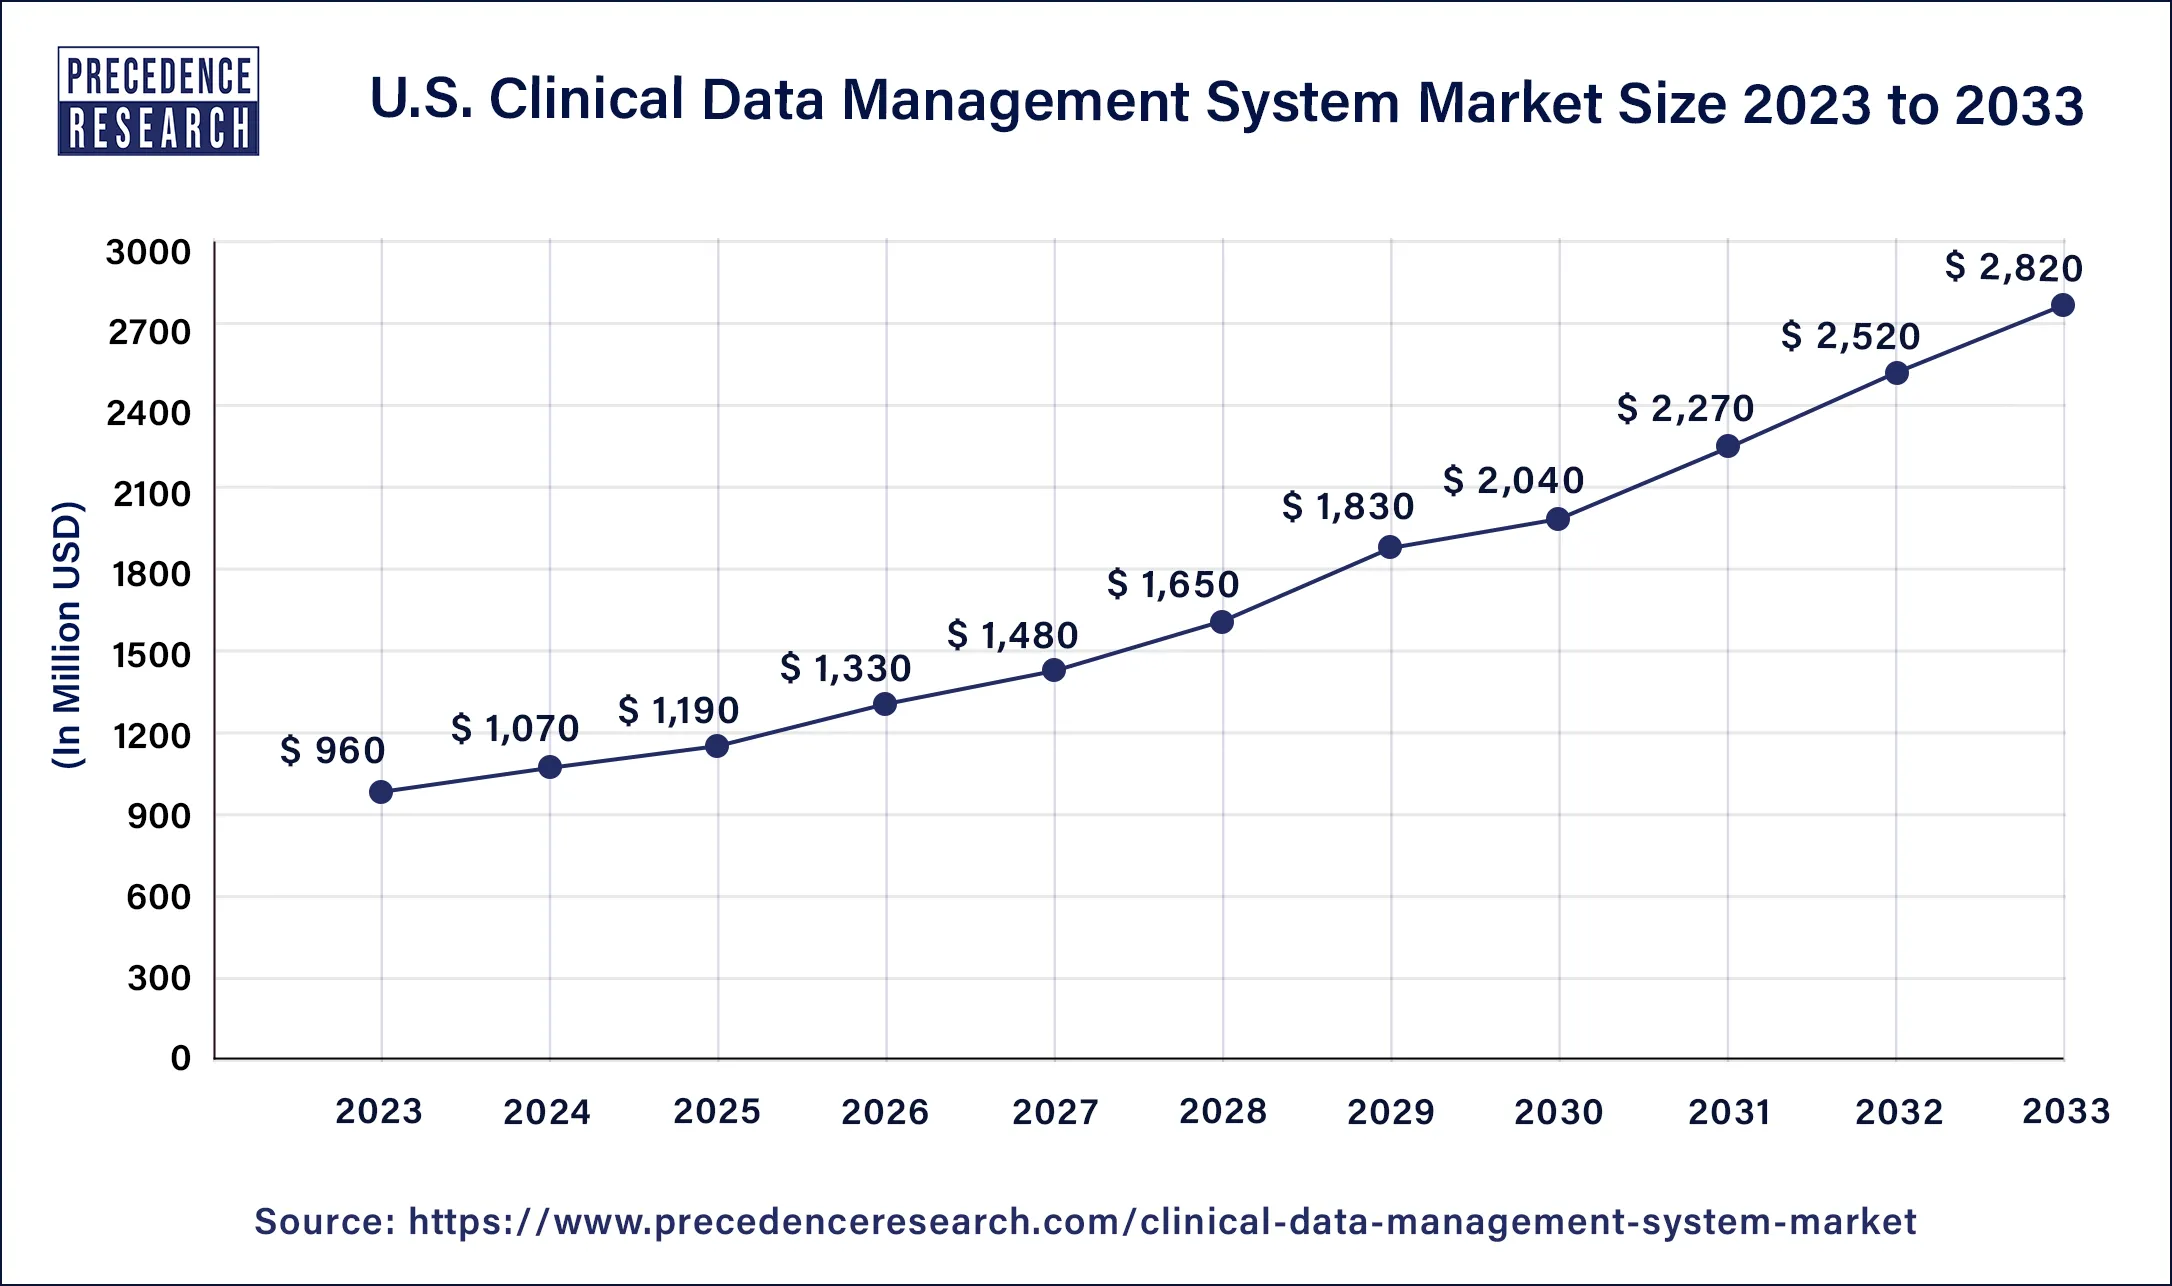 U.S Clinical Data Management System Market Size 2024 to 2033